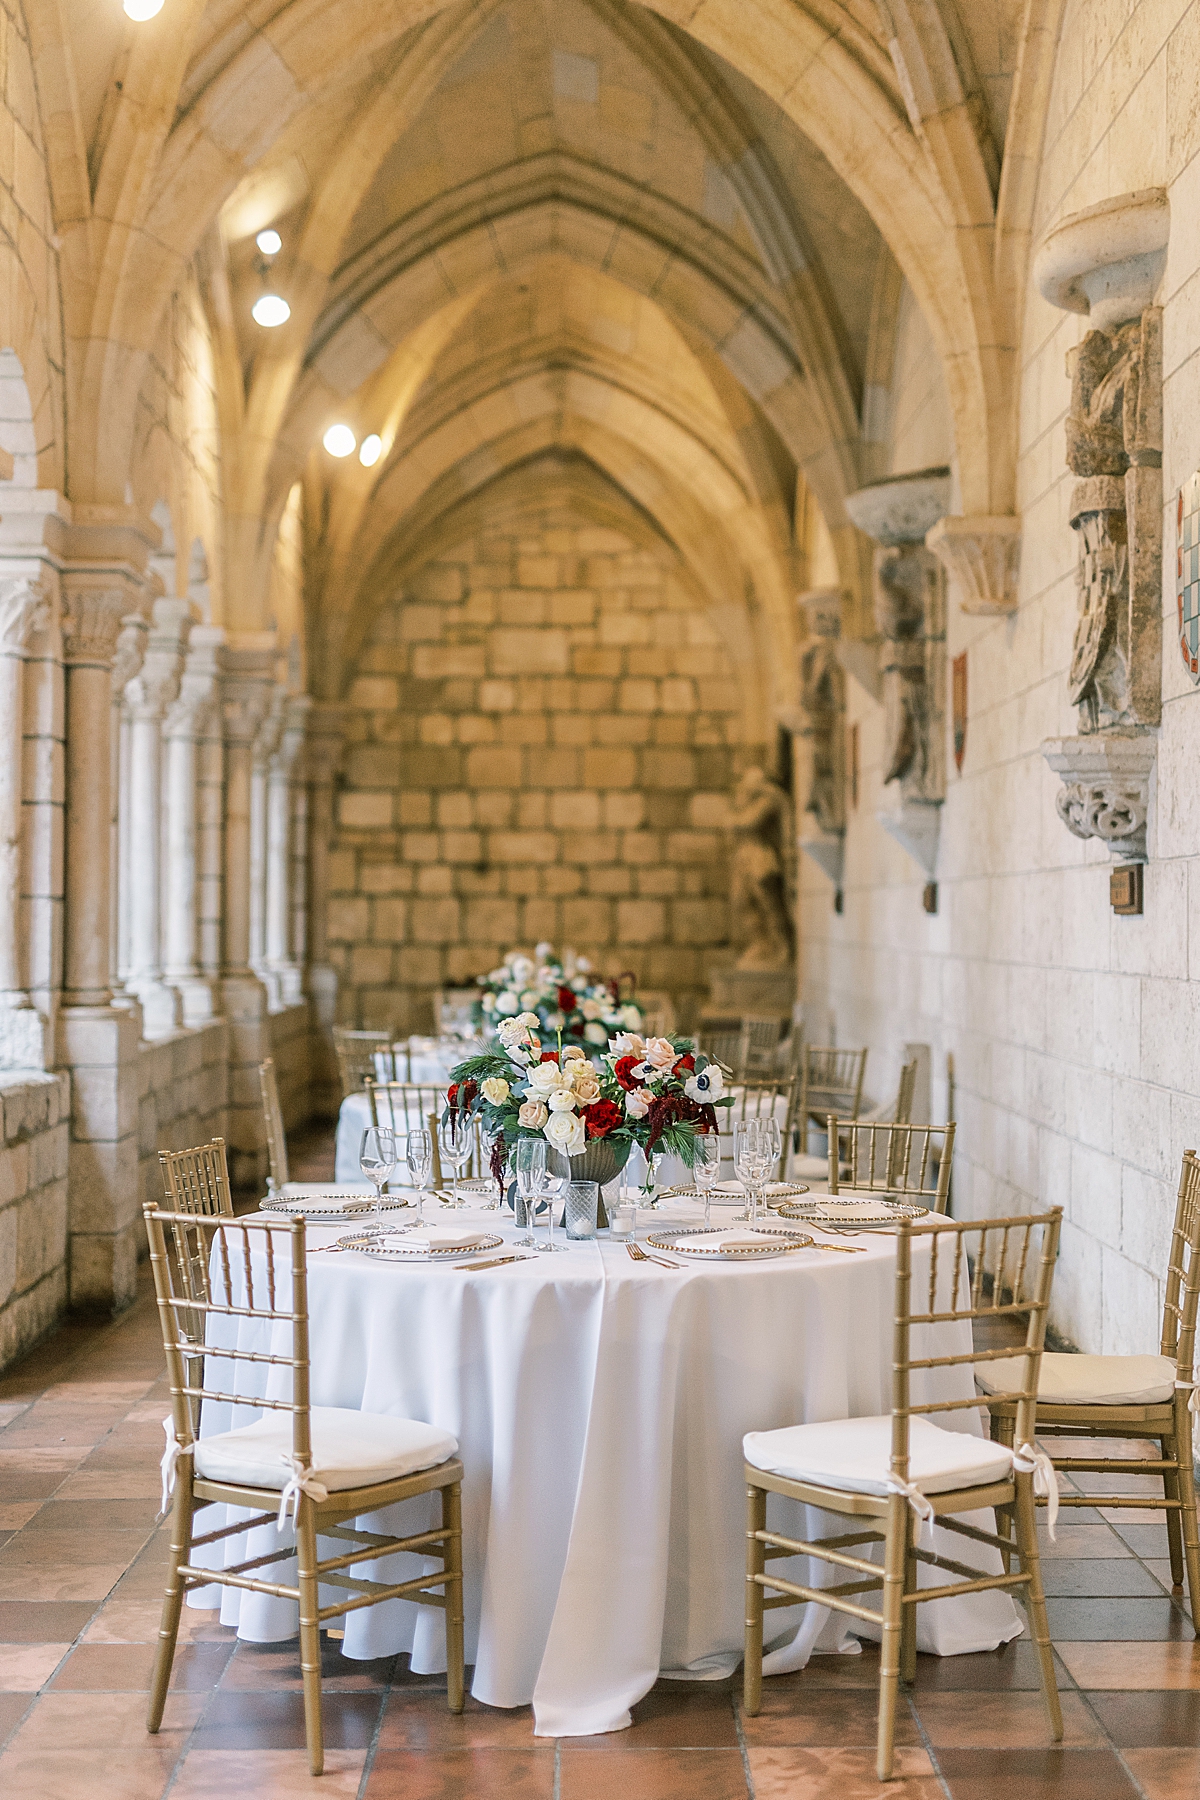 Reception details at this Ancient Spanish Monastery Wedding